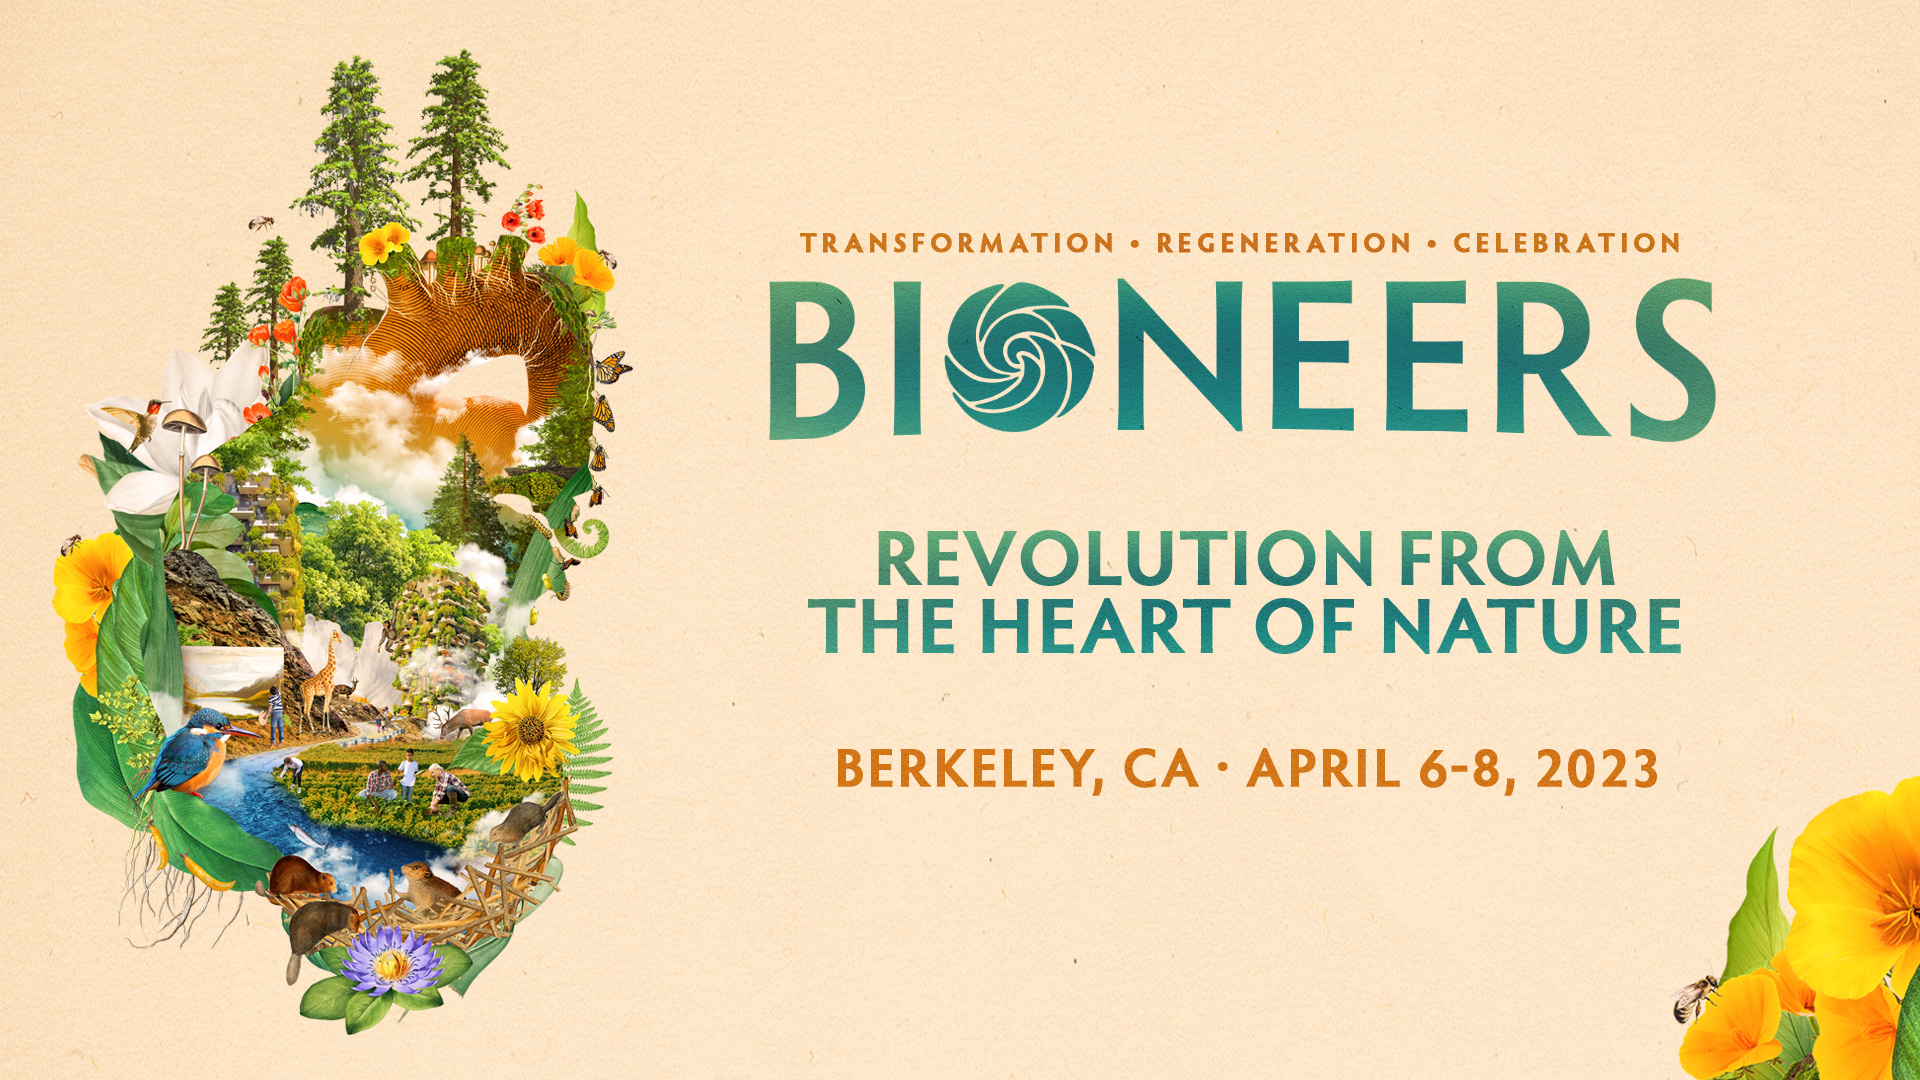 Bioneers 2023 - Revolution from the Heart of Nature